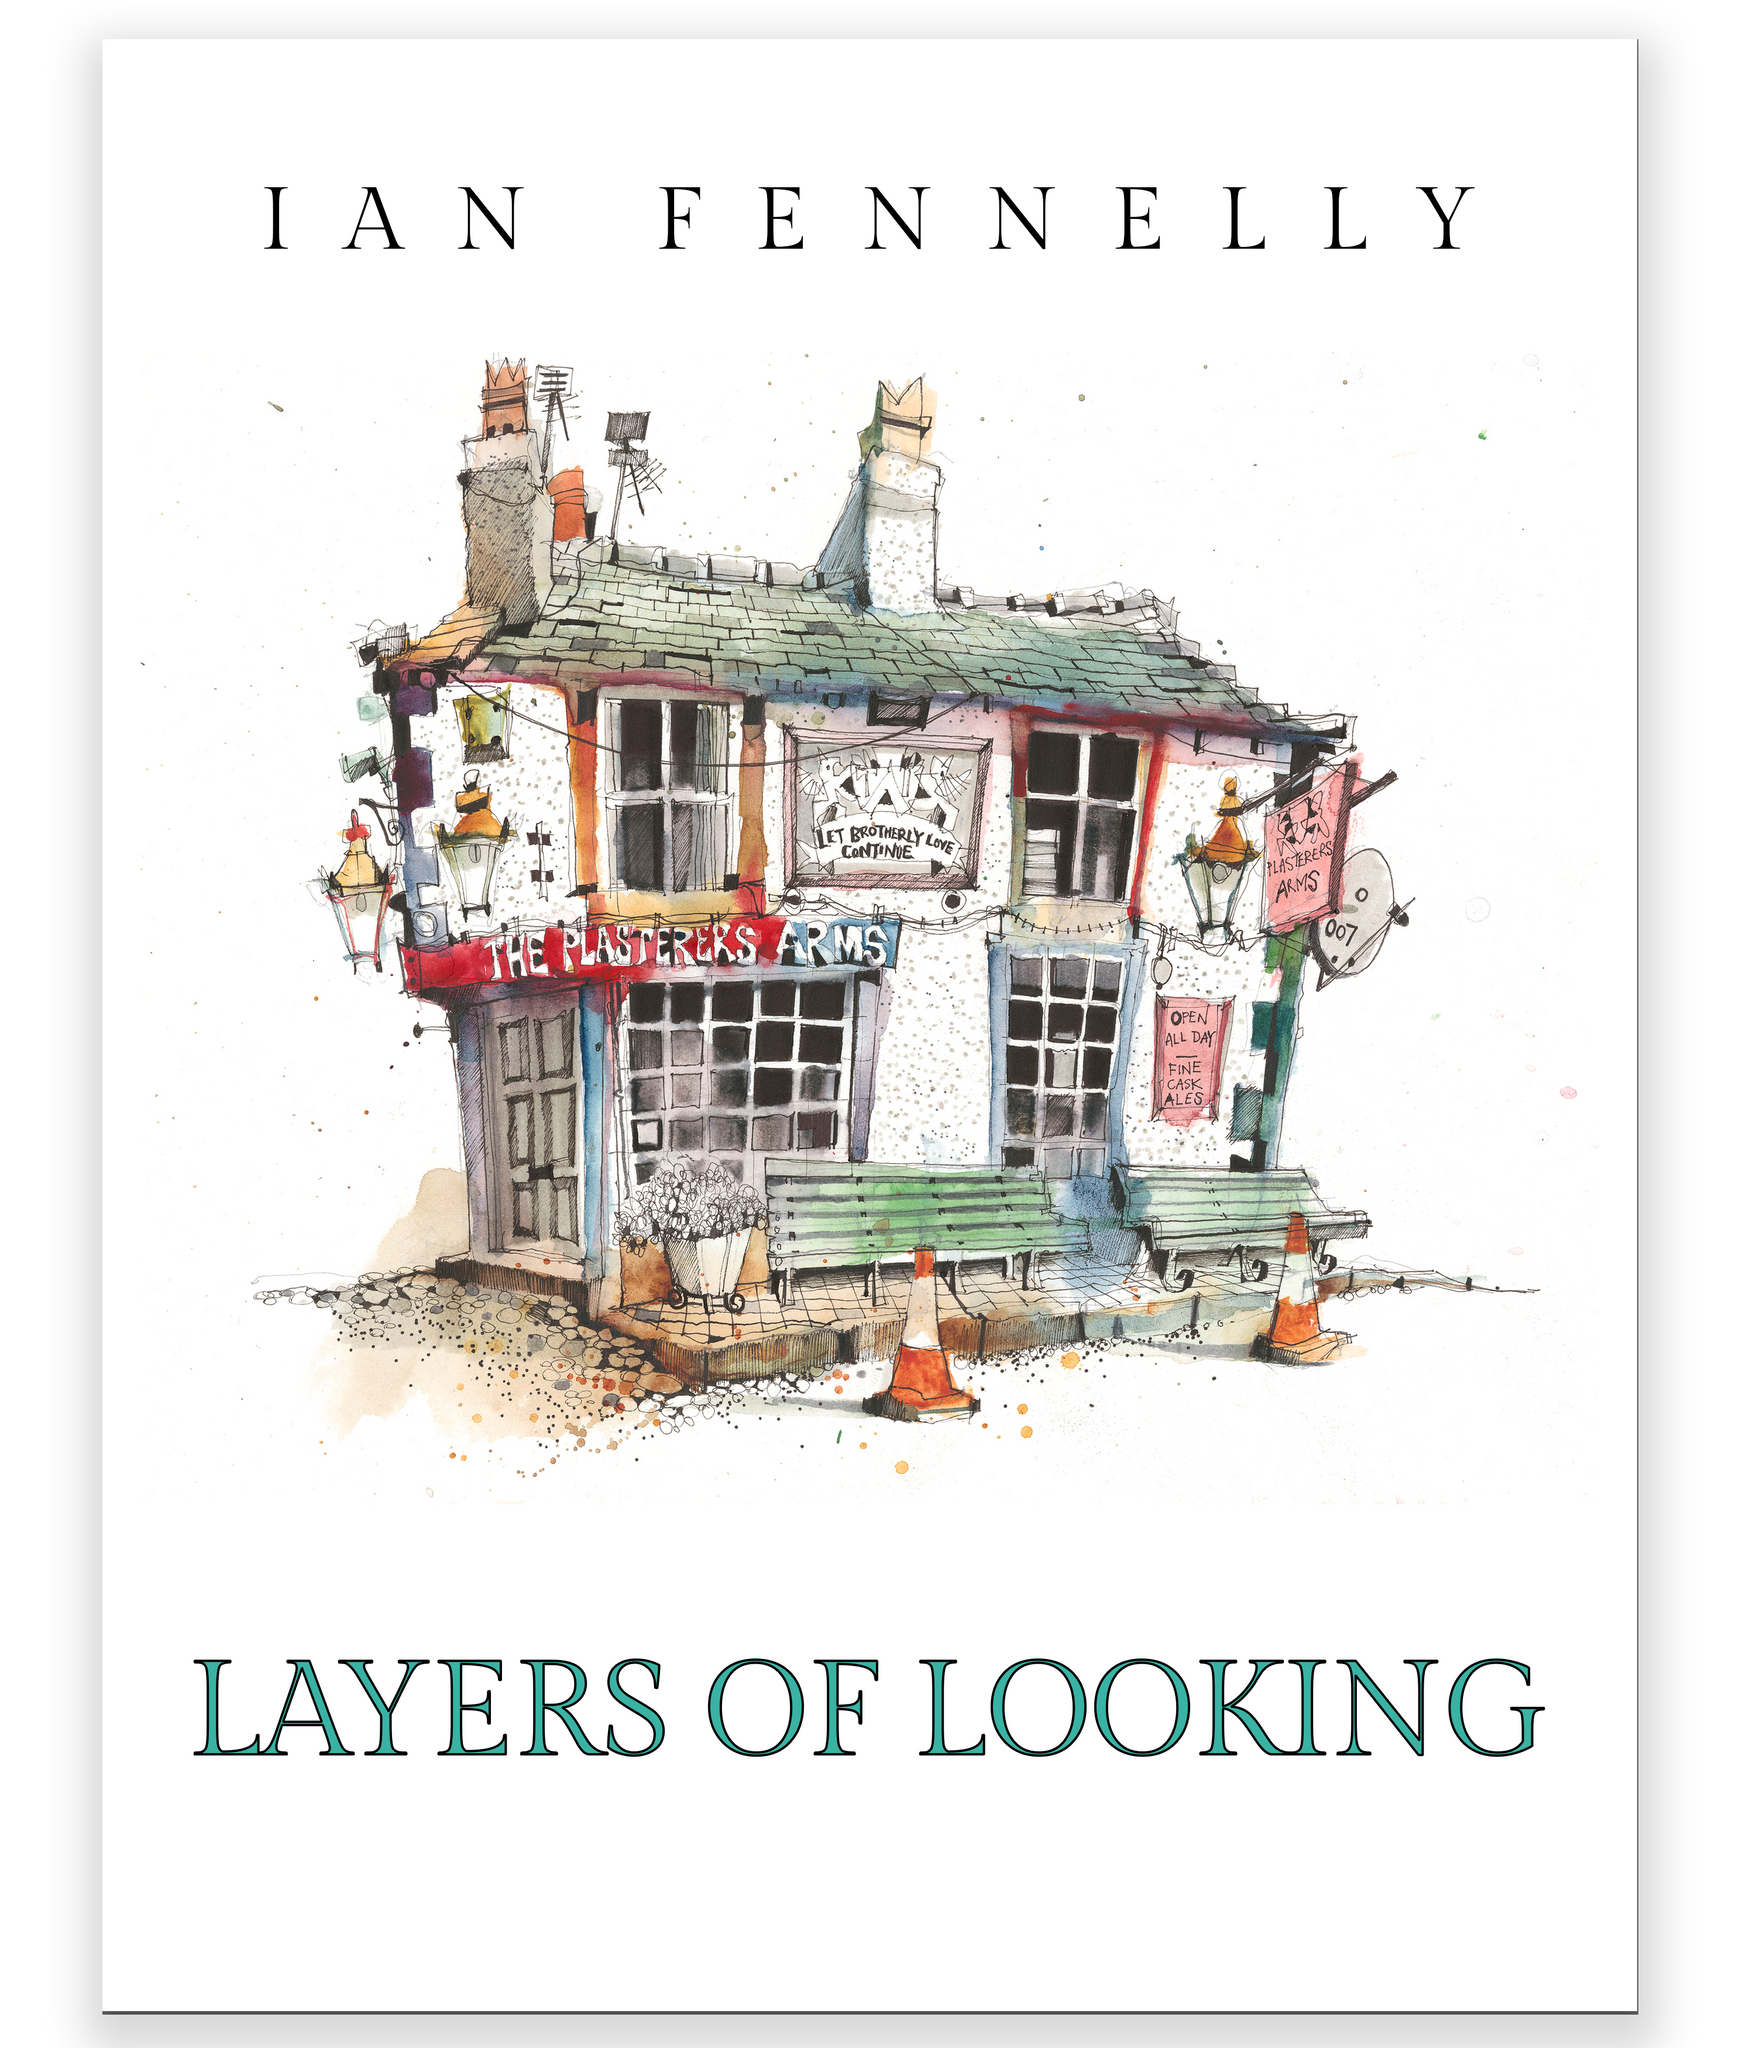 Layers of Looking, new book by Ian Fennelly